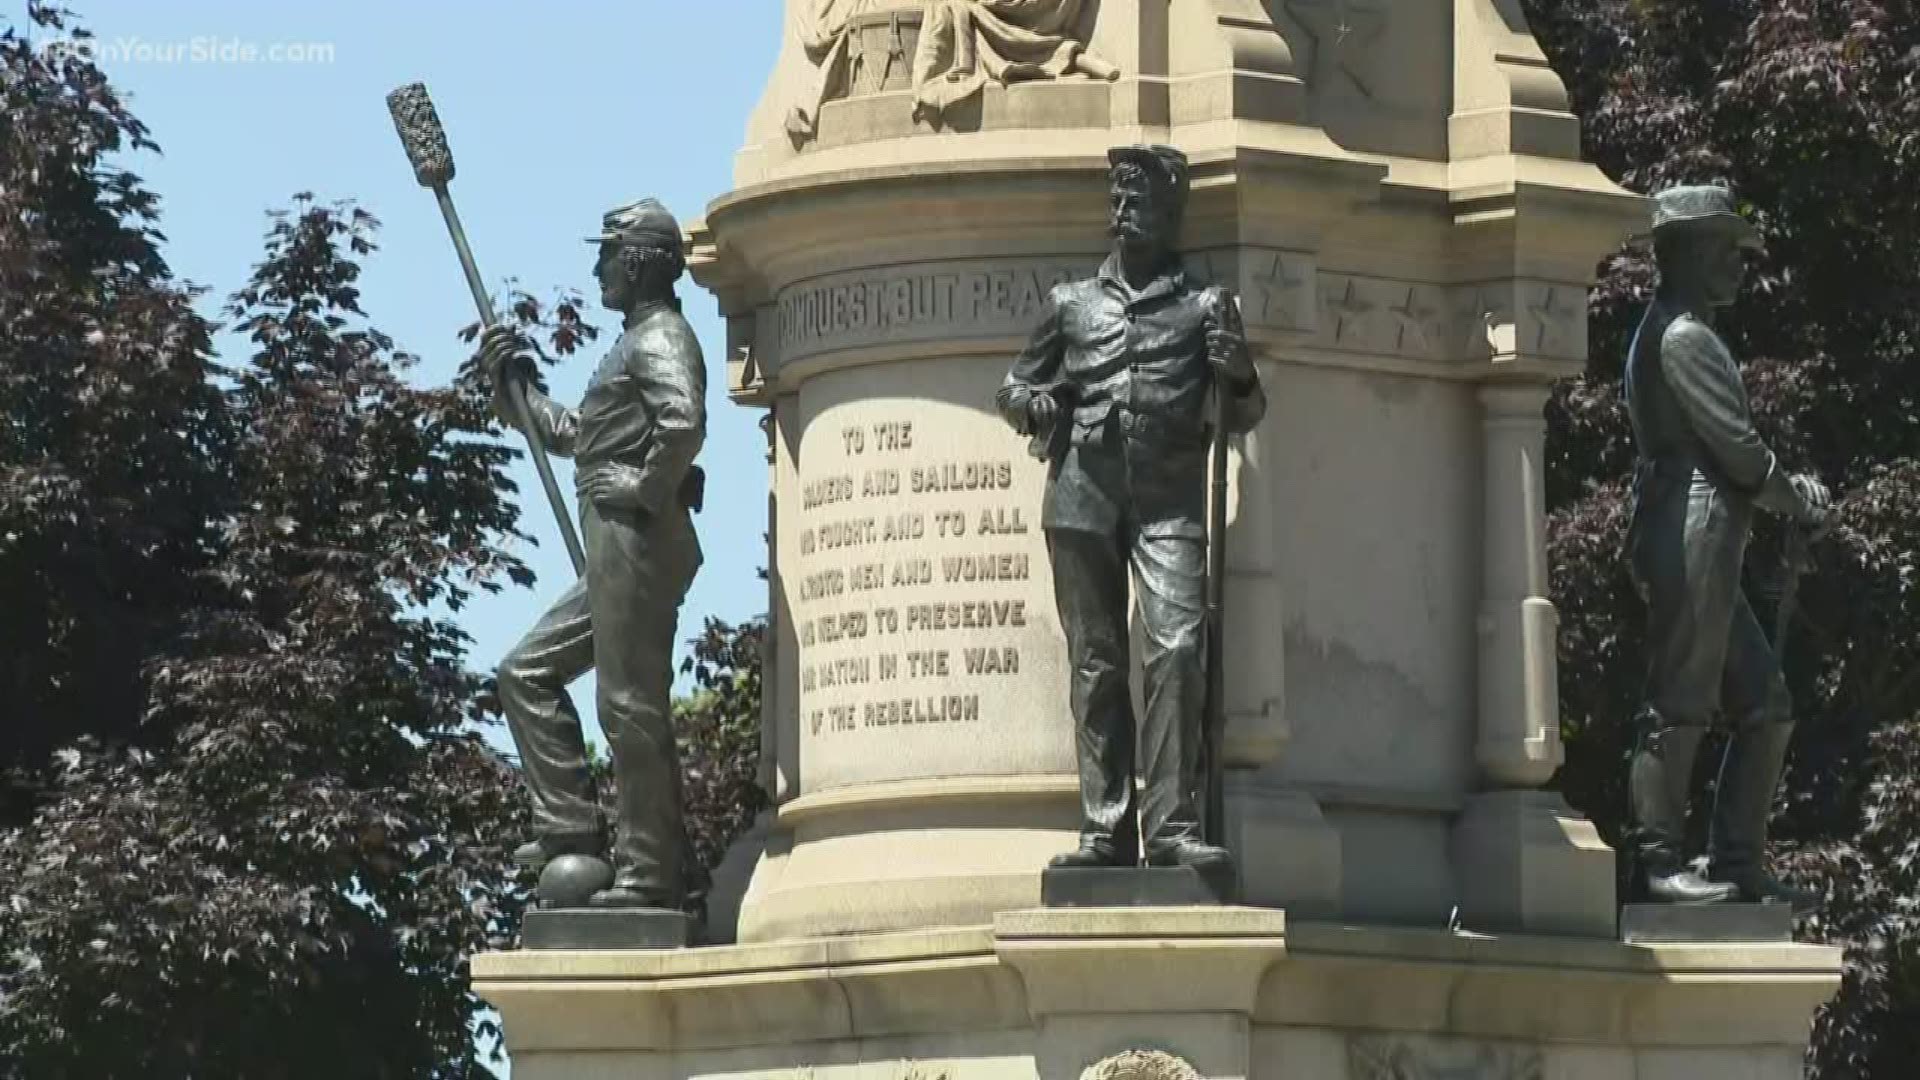 Muskegon turns 150 years old